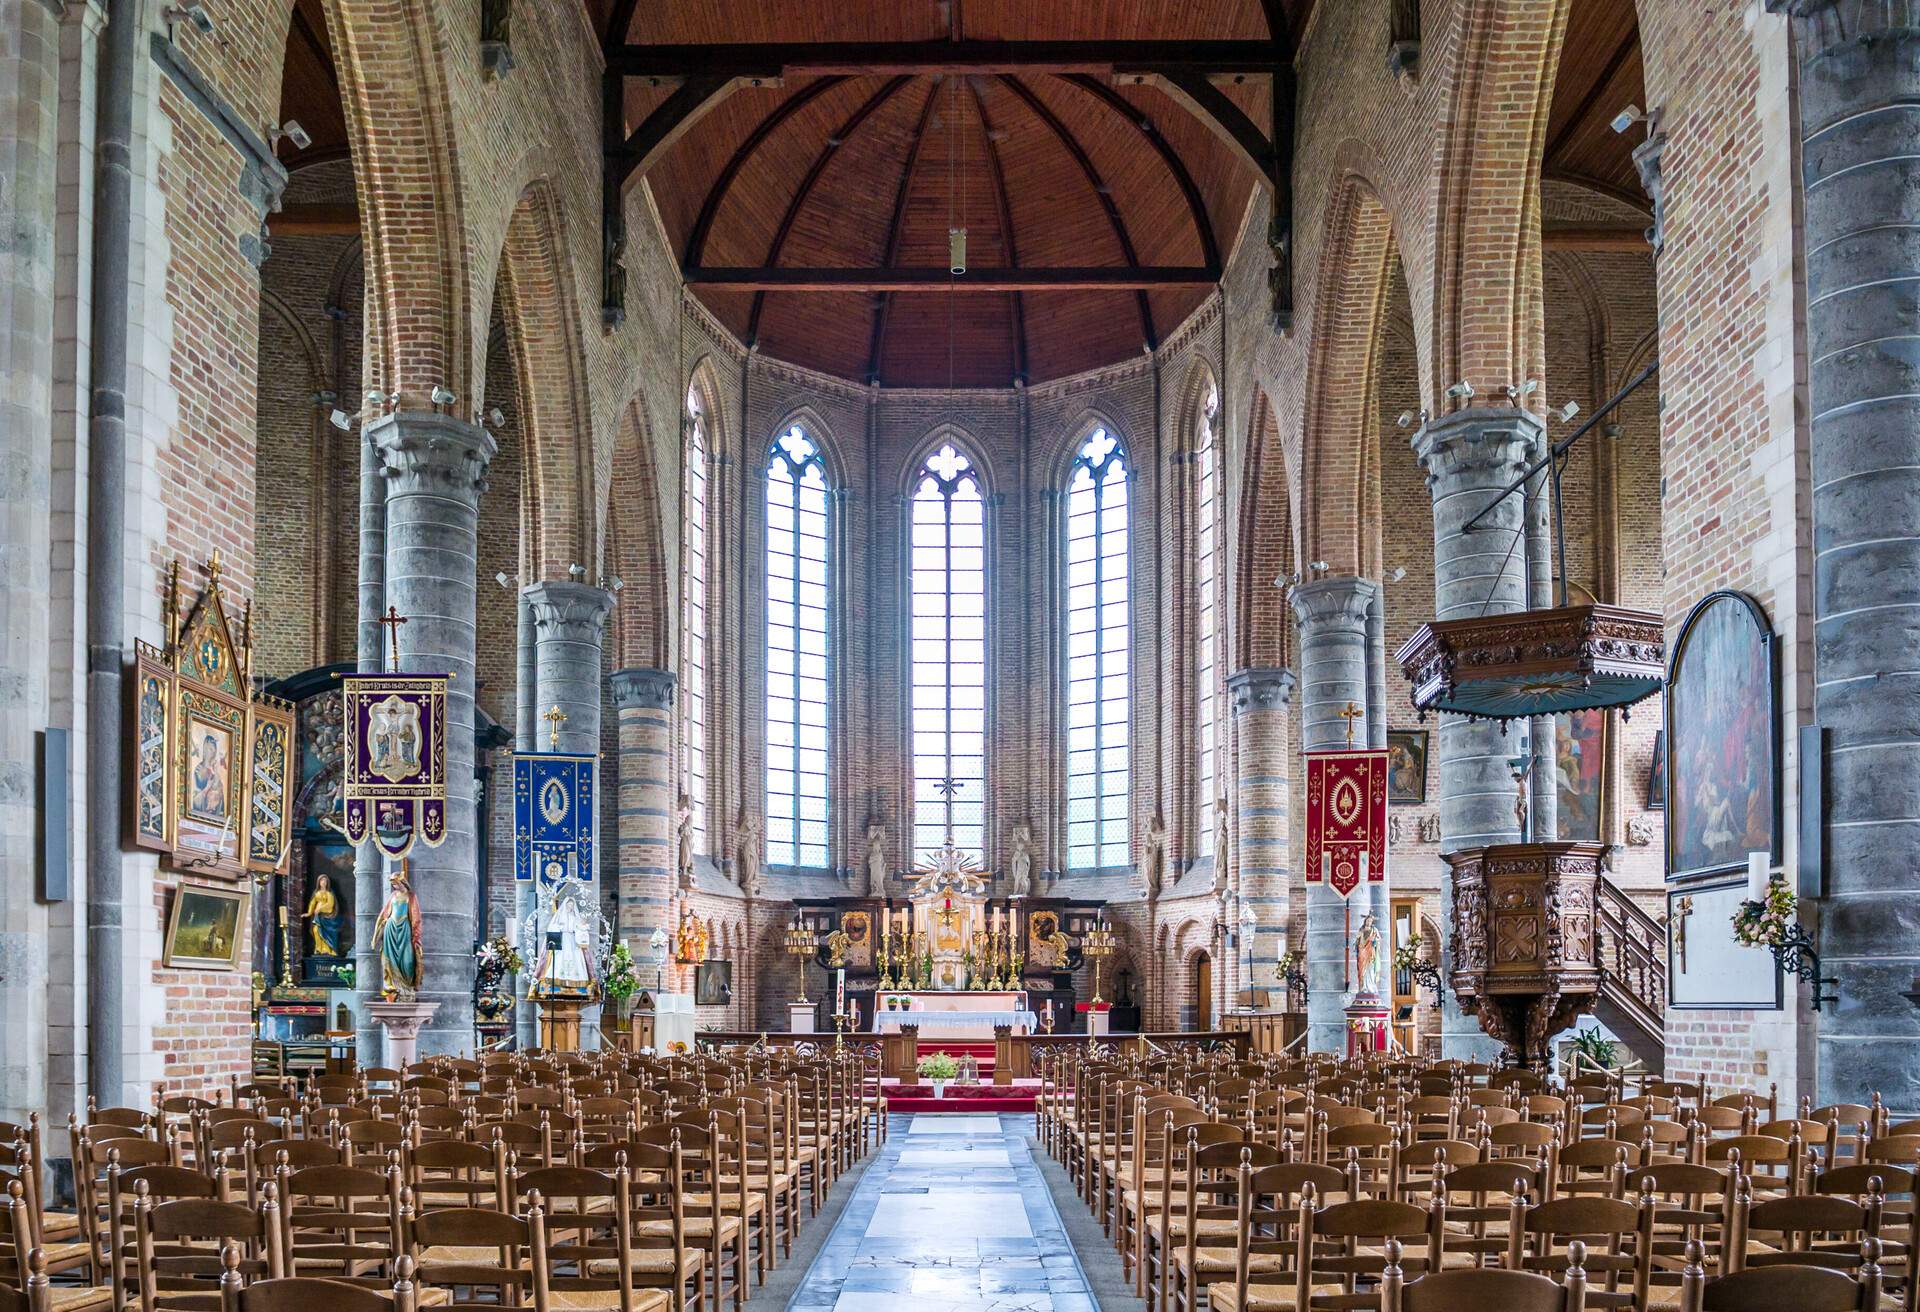 Church of our Lady interior in historic town of Damme, West Flanders, Belgium